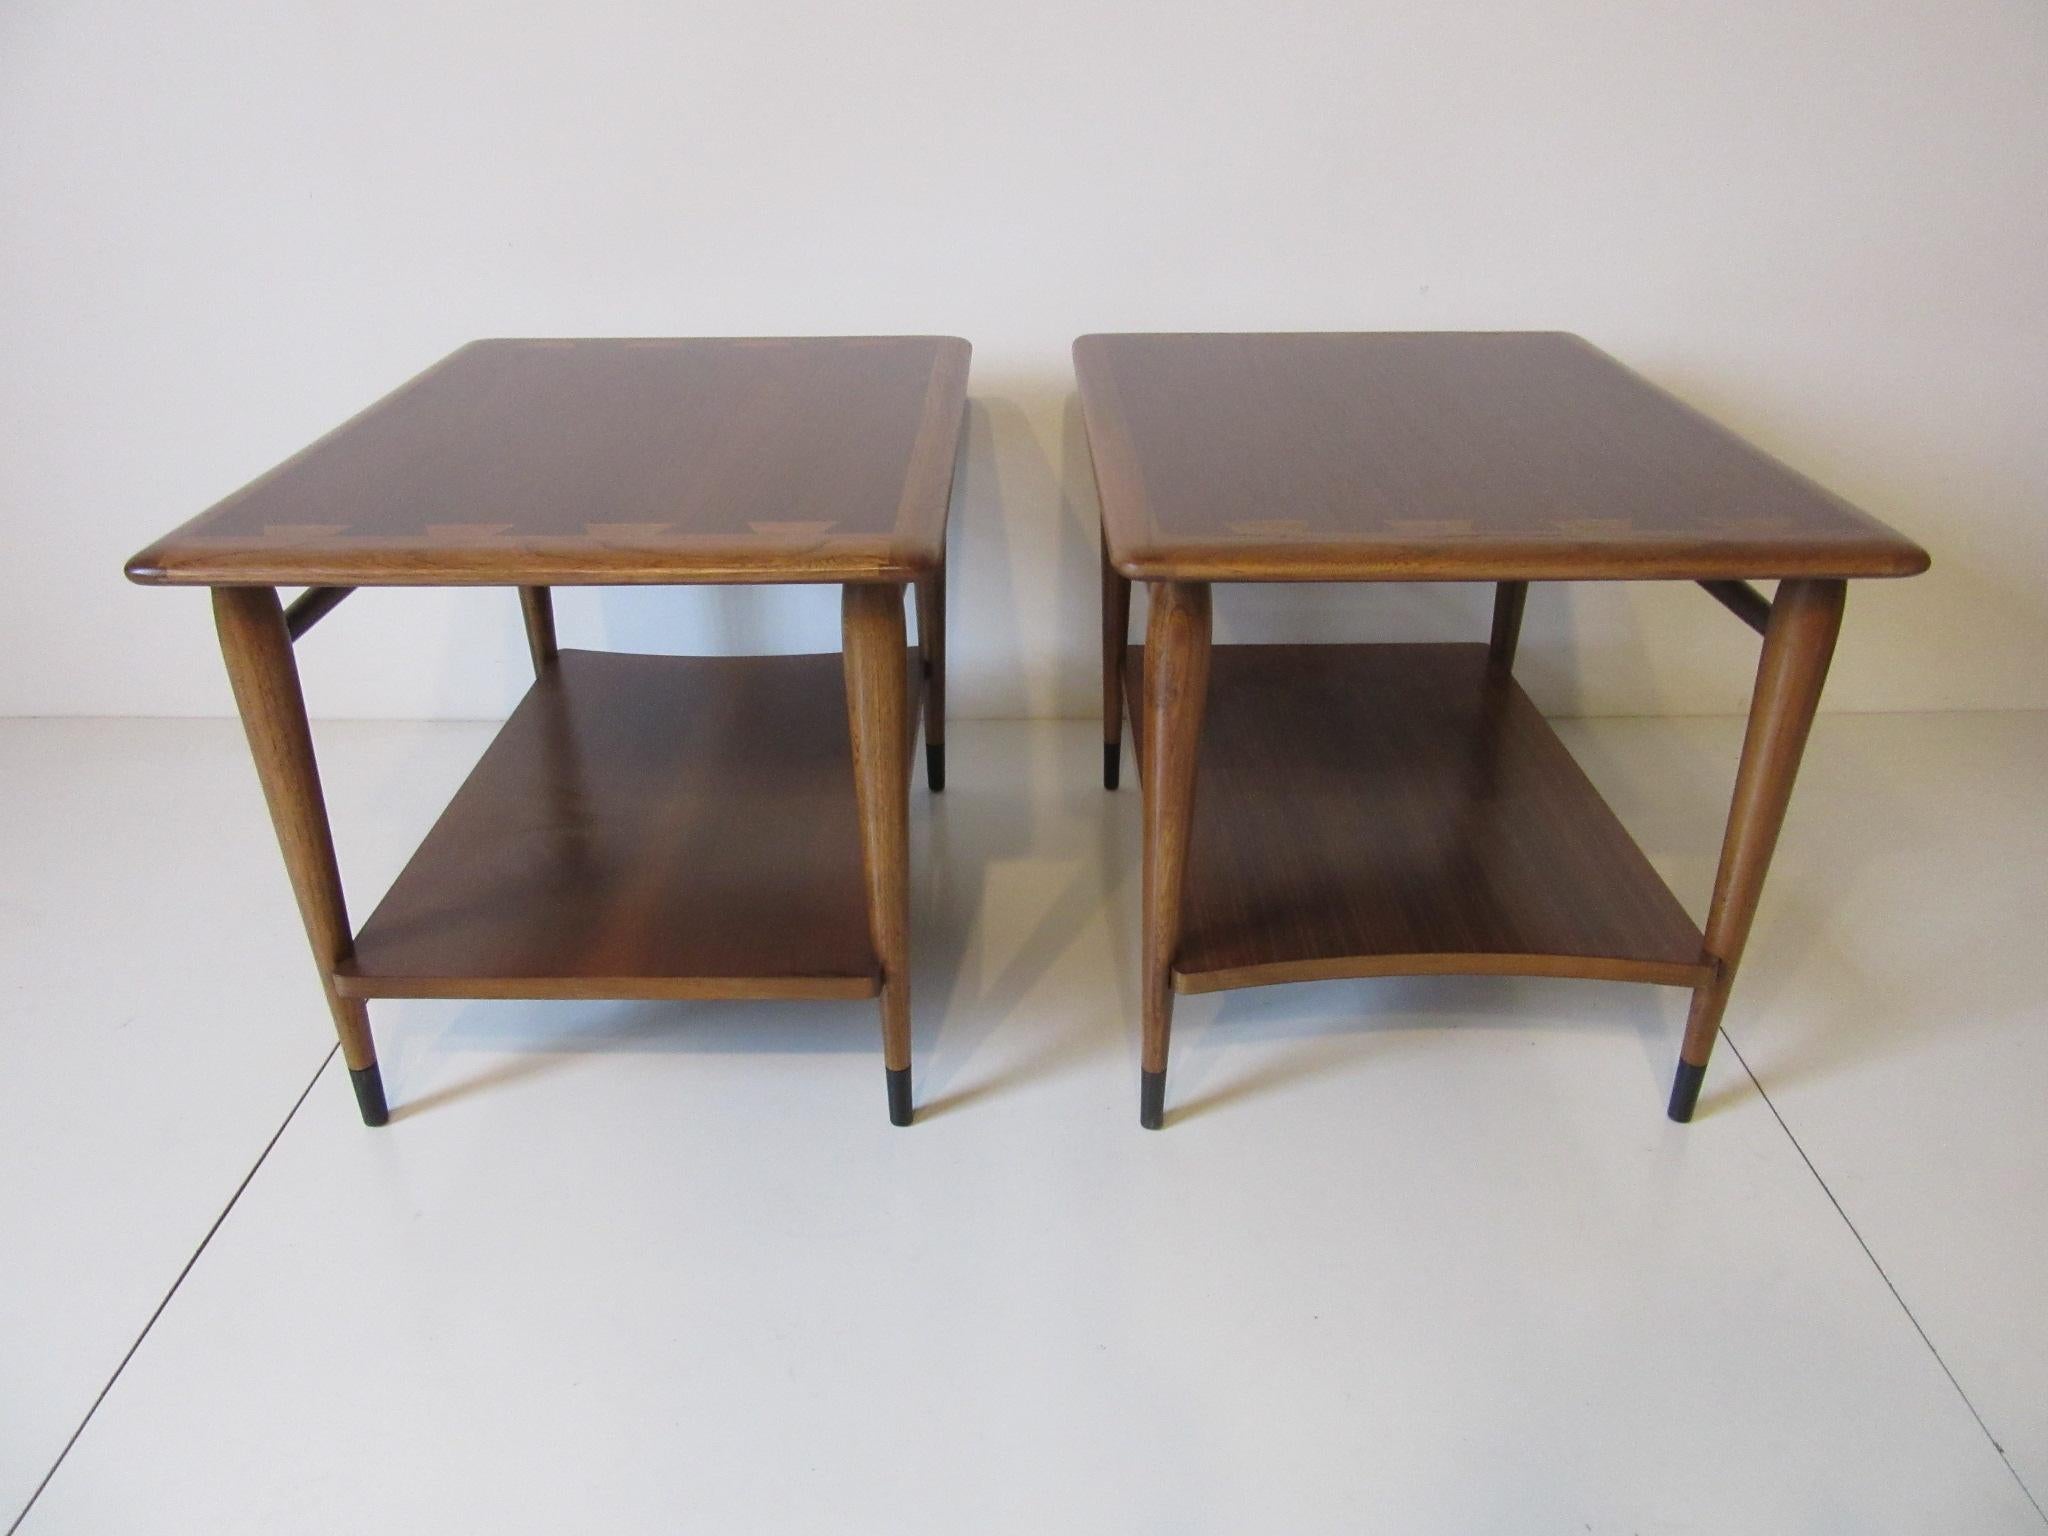 A pair of walnut end tables with lighter wood details to the edges, black lower leg caps and second shelve, one shelve is squared and the other has a curved edge . From the Acclaim collection and still retains the branded manufactures mark to the